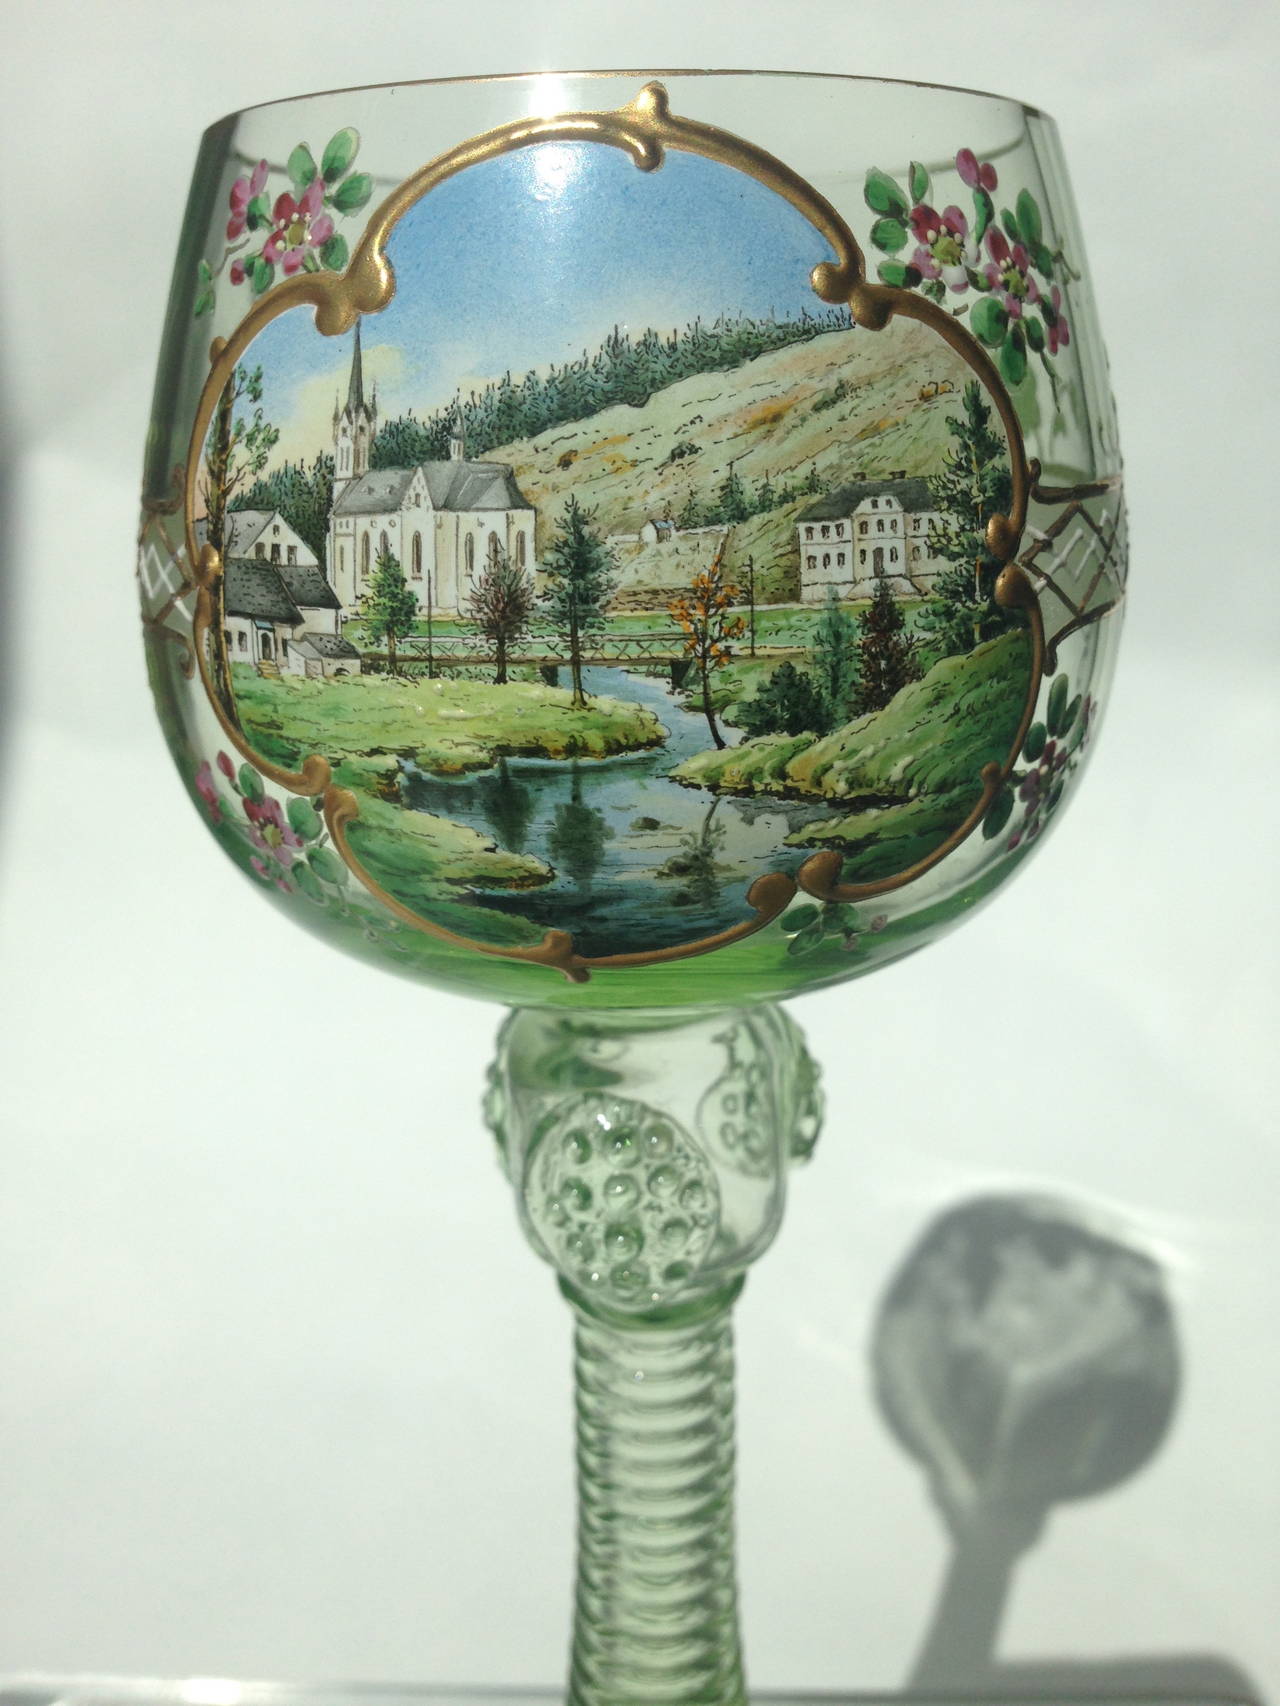 Moser Glass Enameled Landscape and Architectural Scenes, circa 1890 In Excellent Condition For Sale In Redding, CA